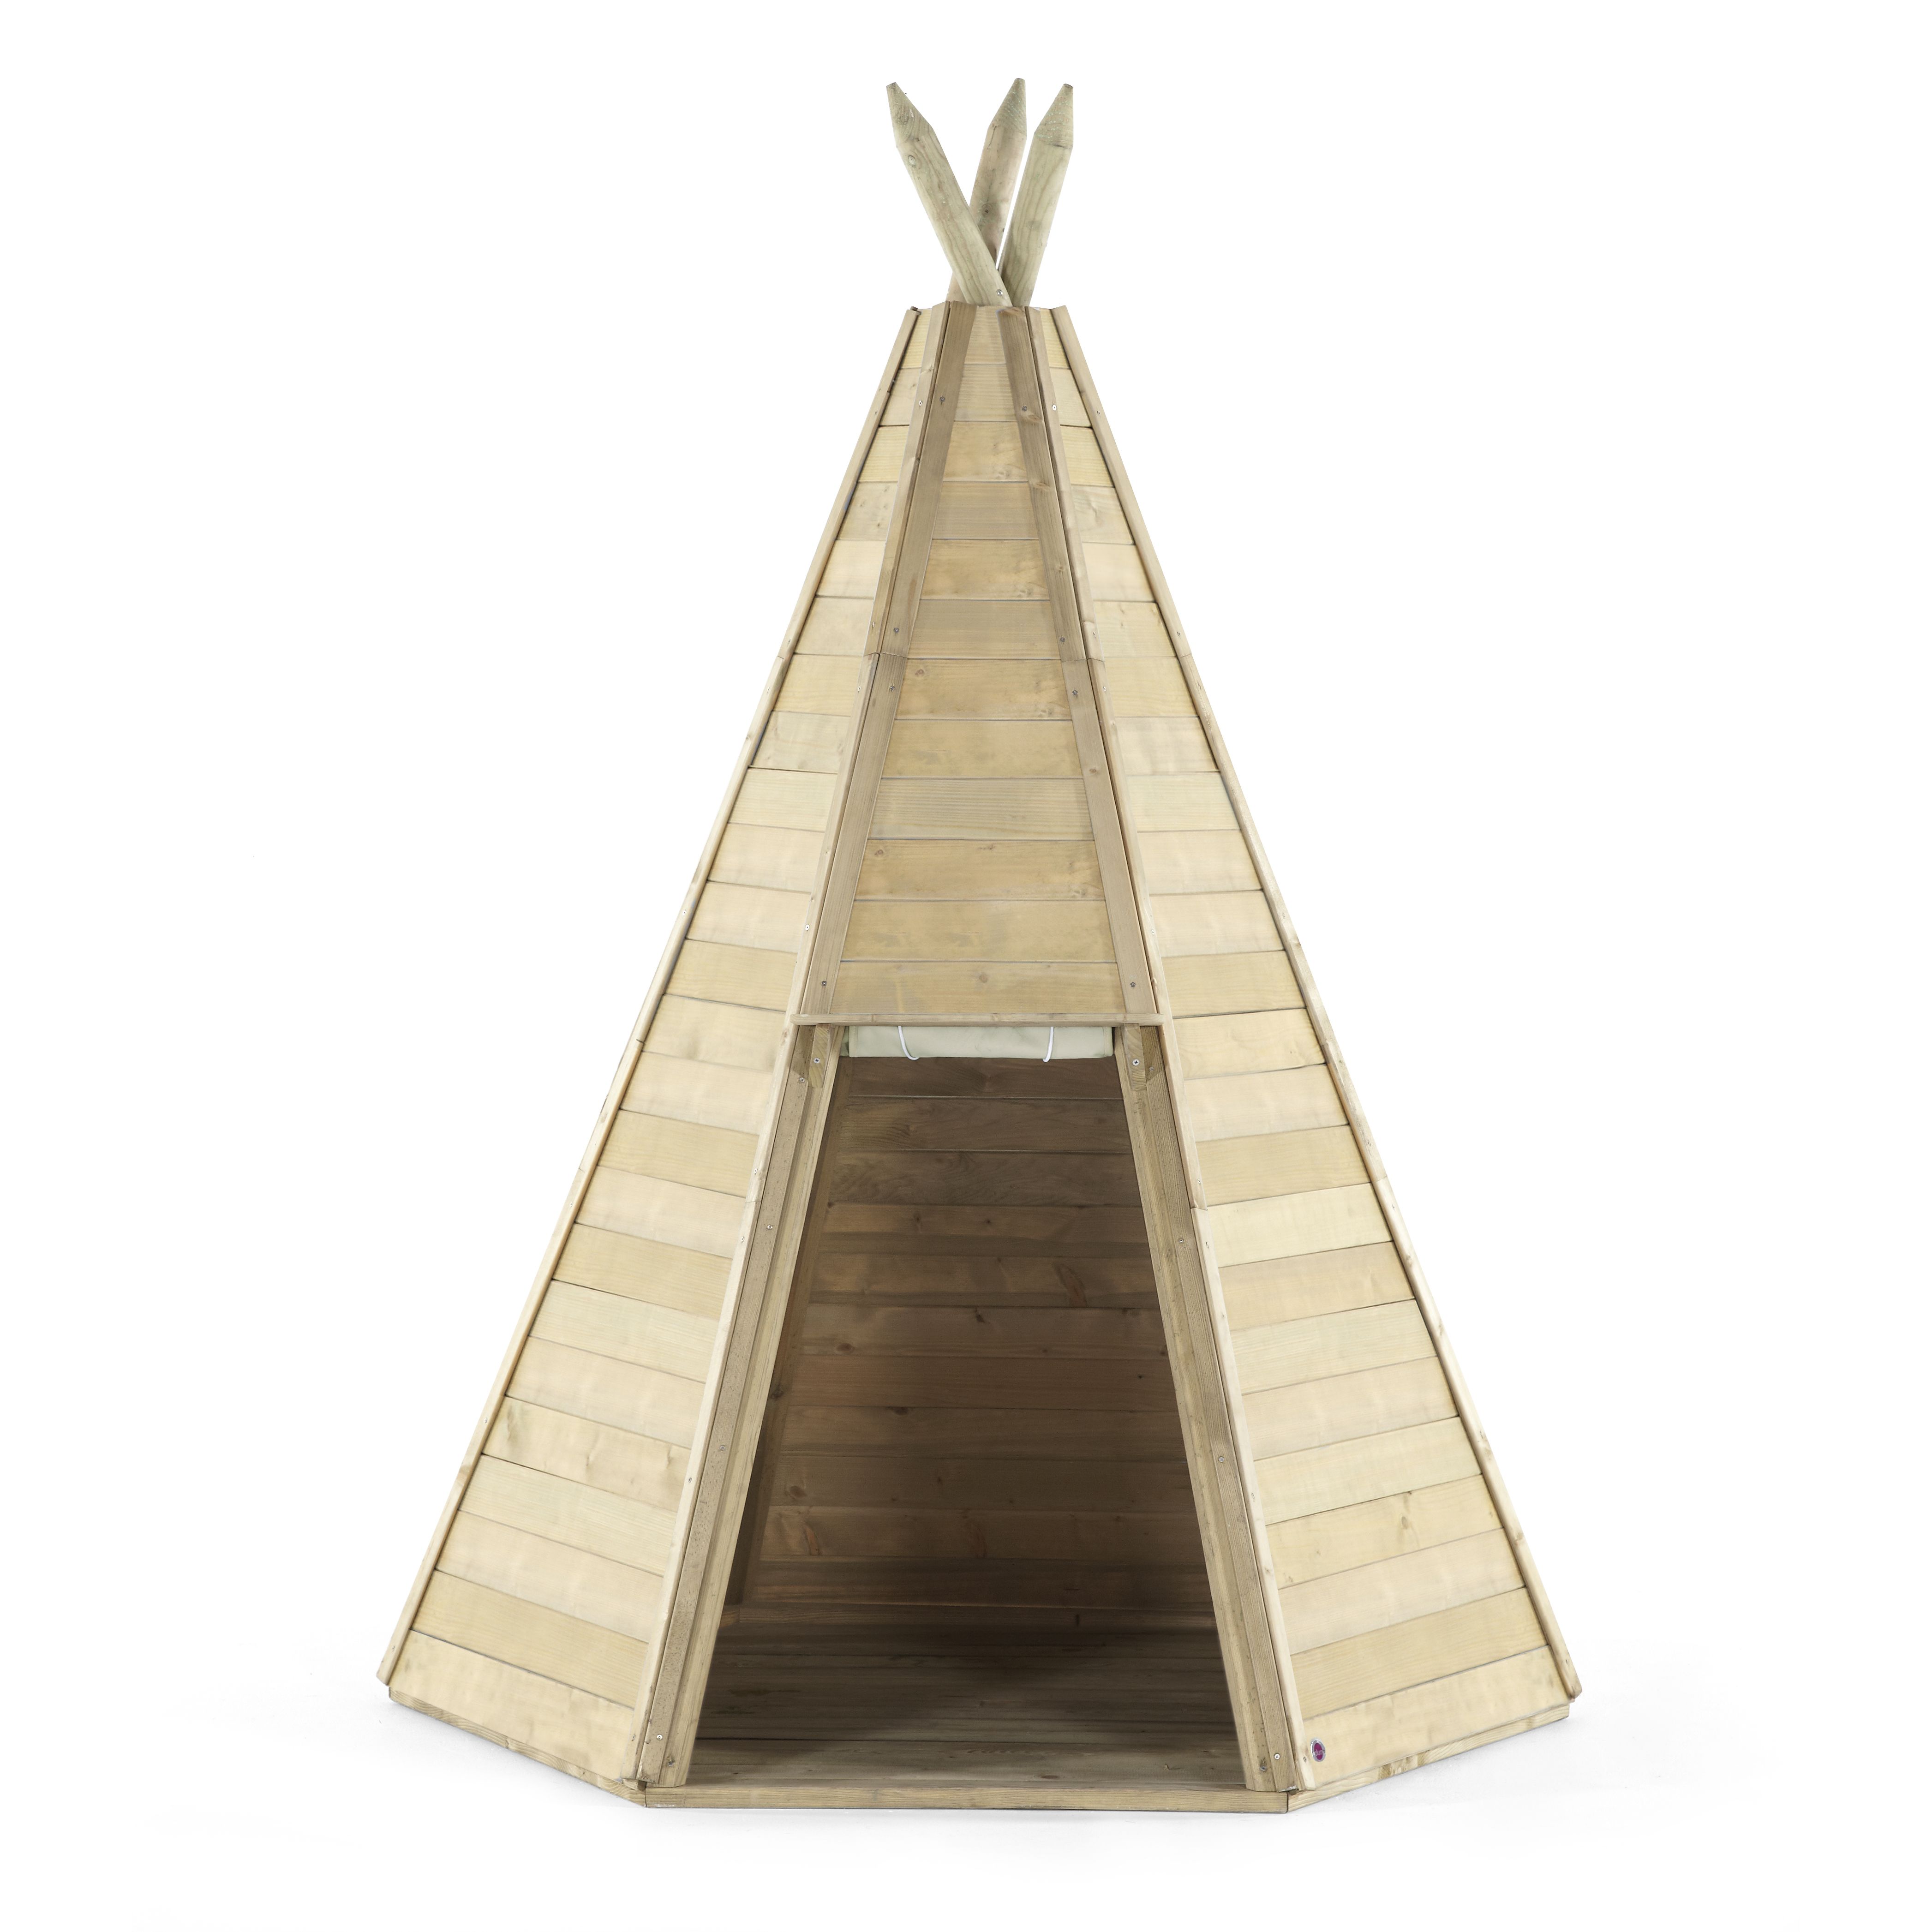 L150 x W150 Outdoor Wooden Teepee with Base | Departments | DIY at B&Q